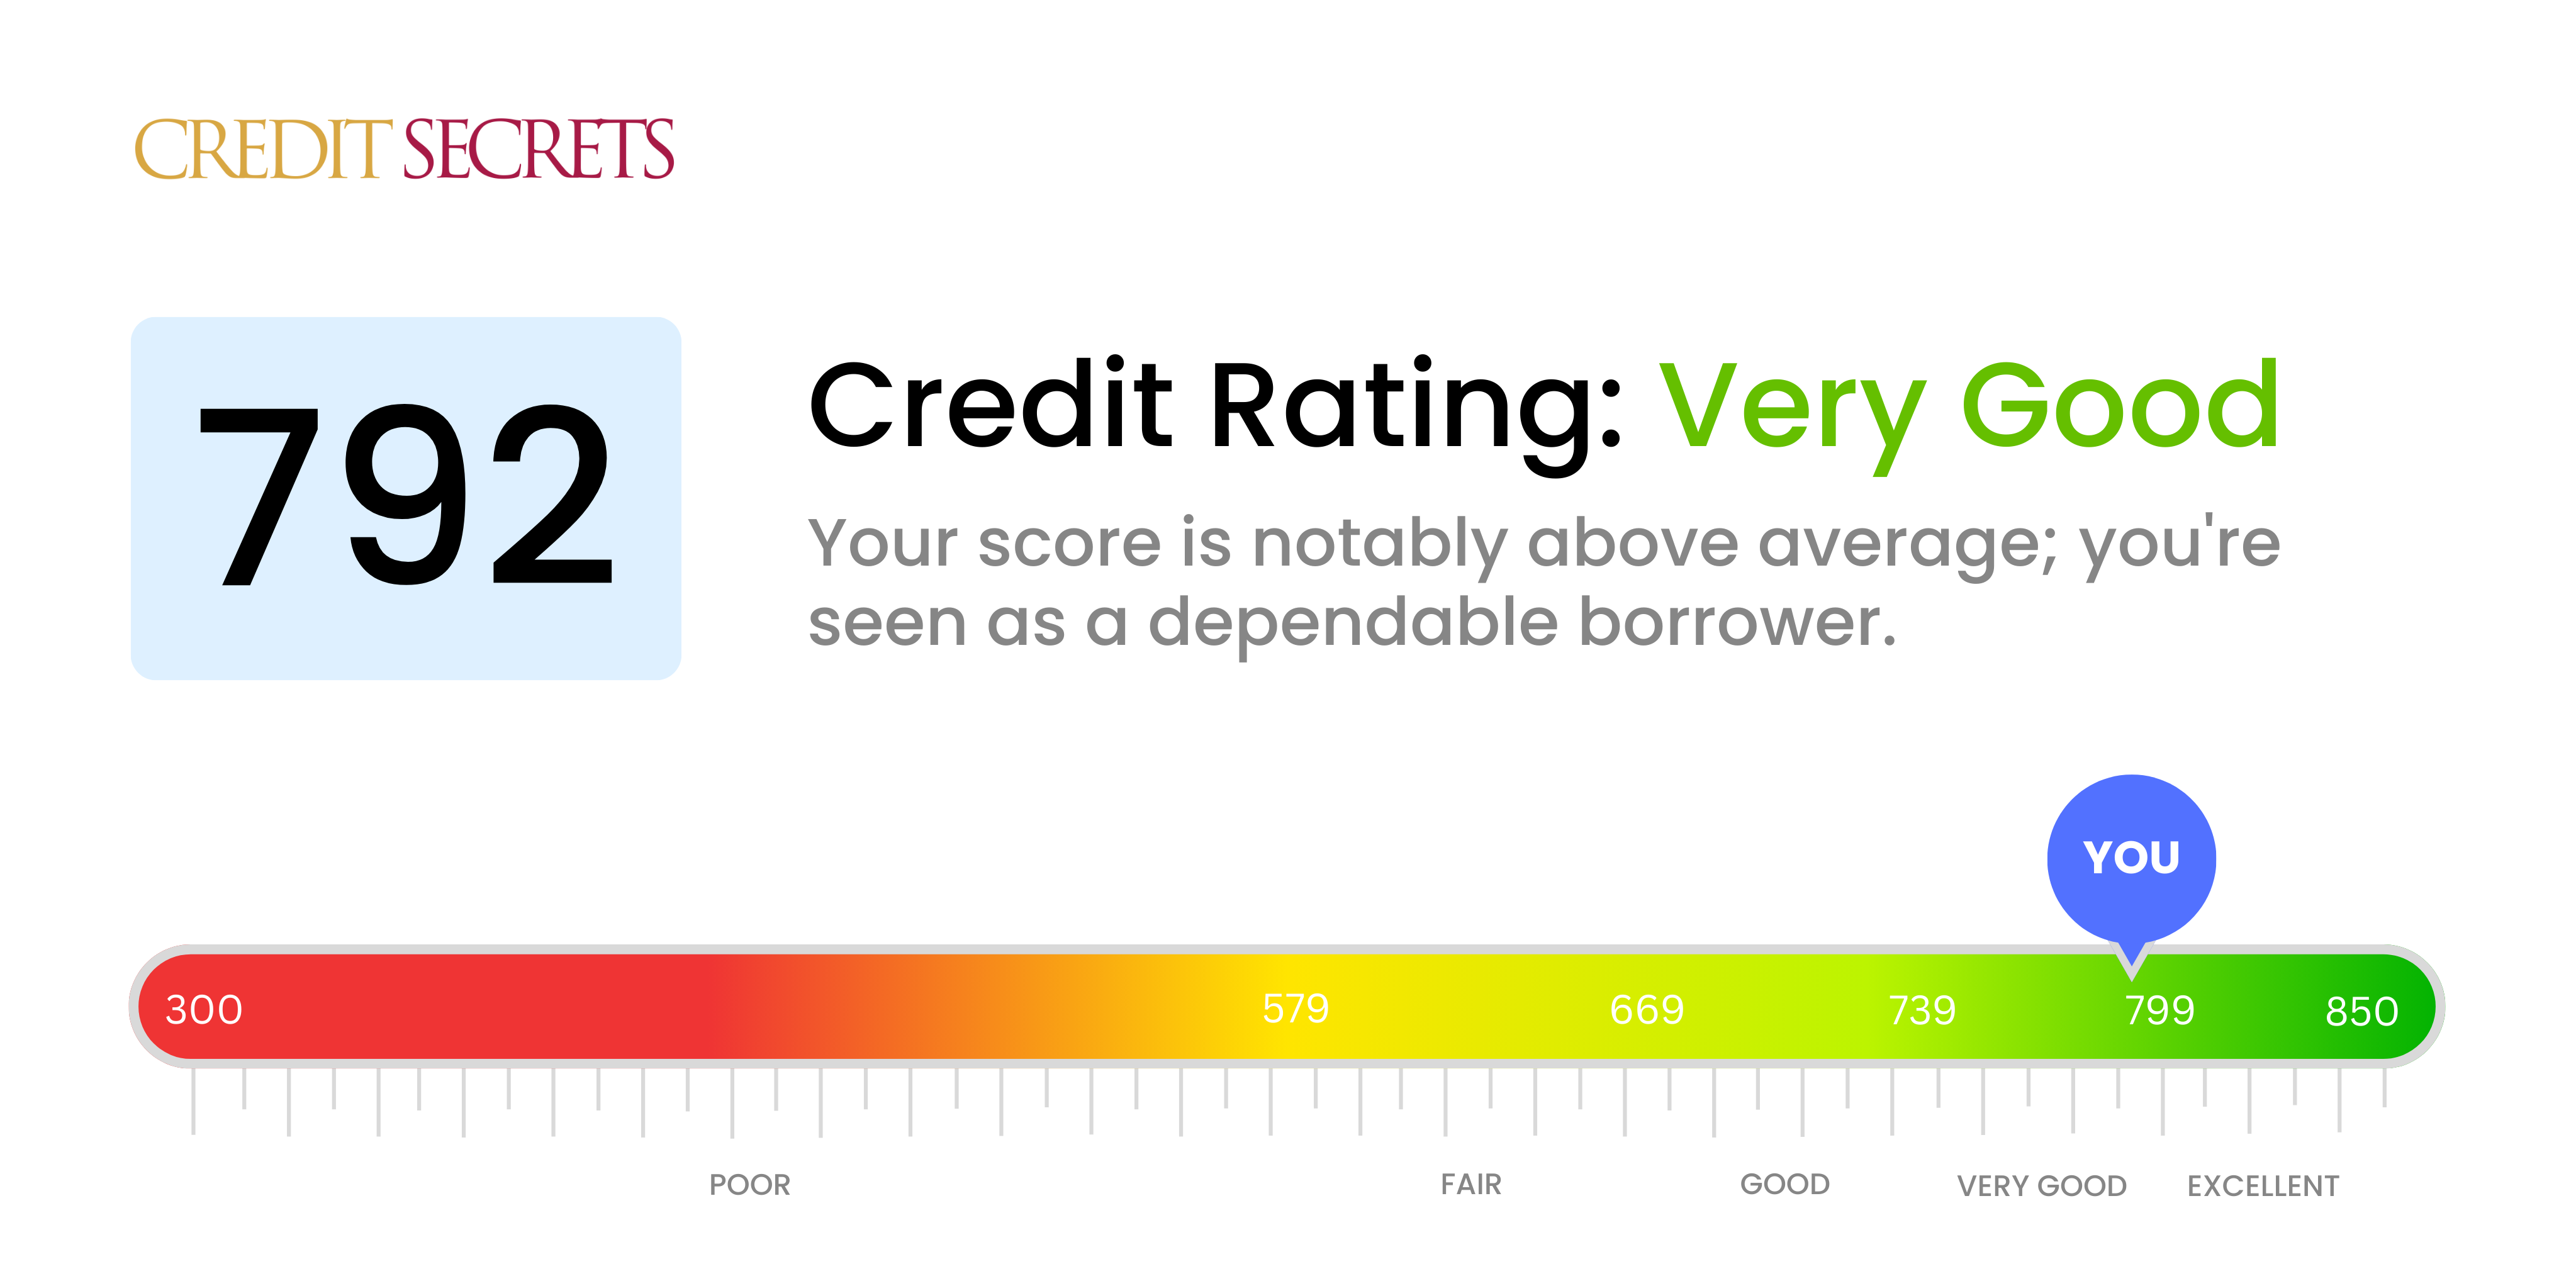 Is 792 a good credit score?